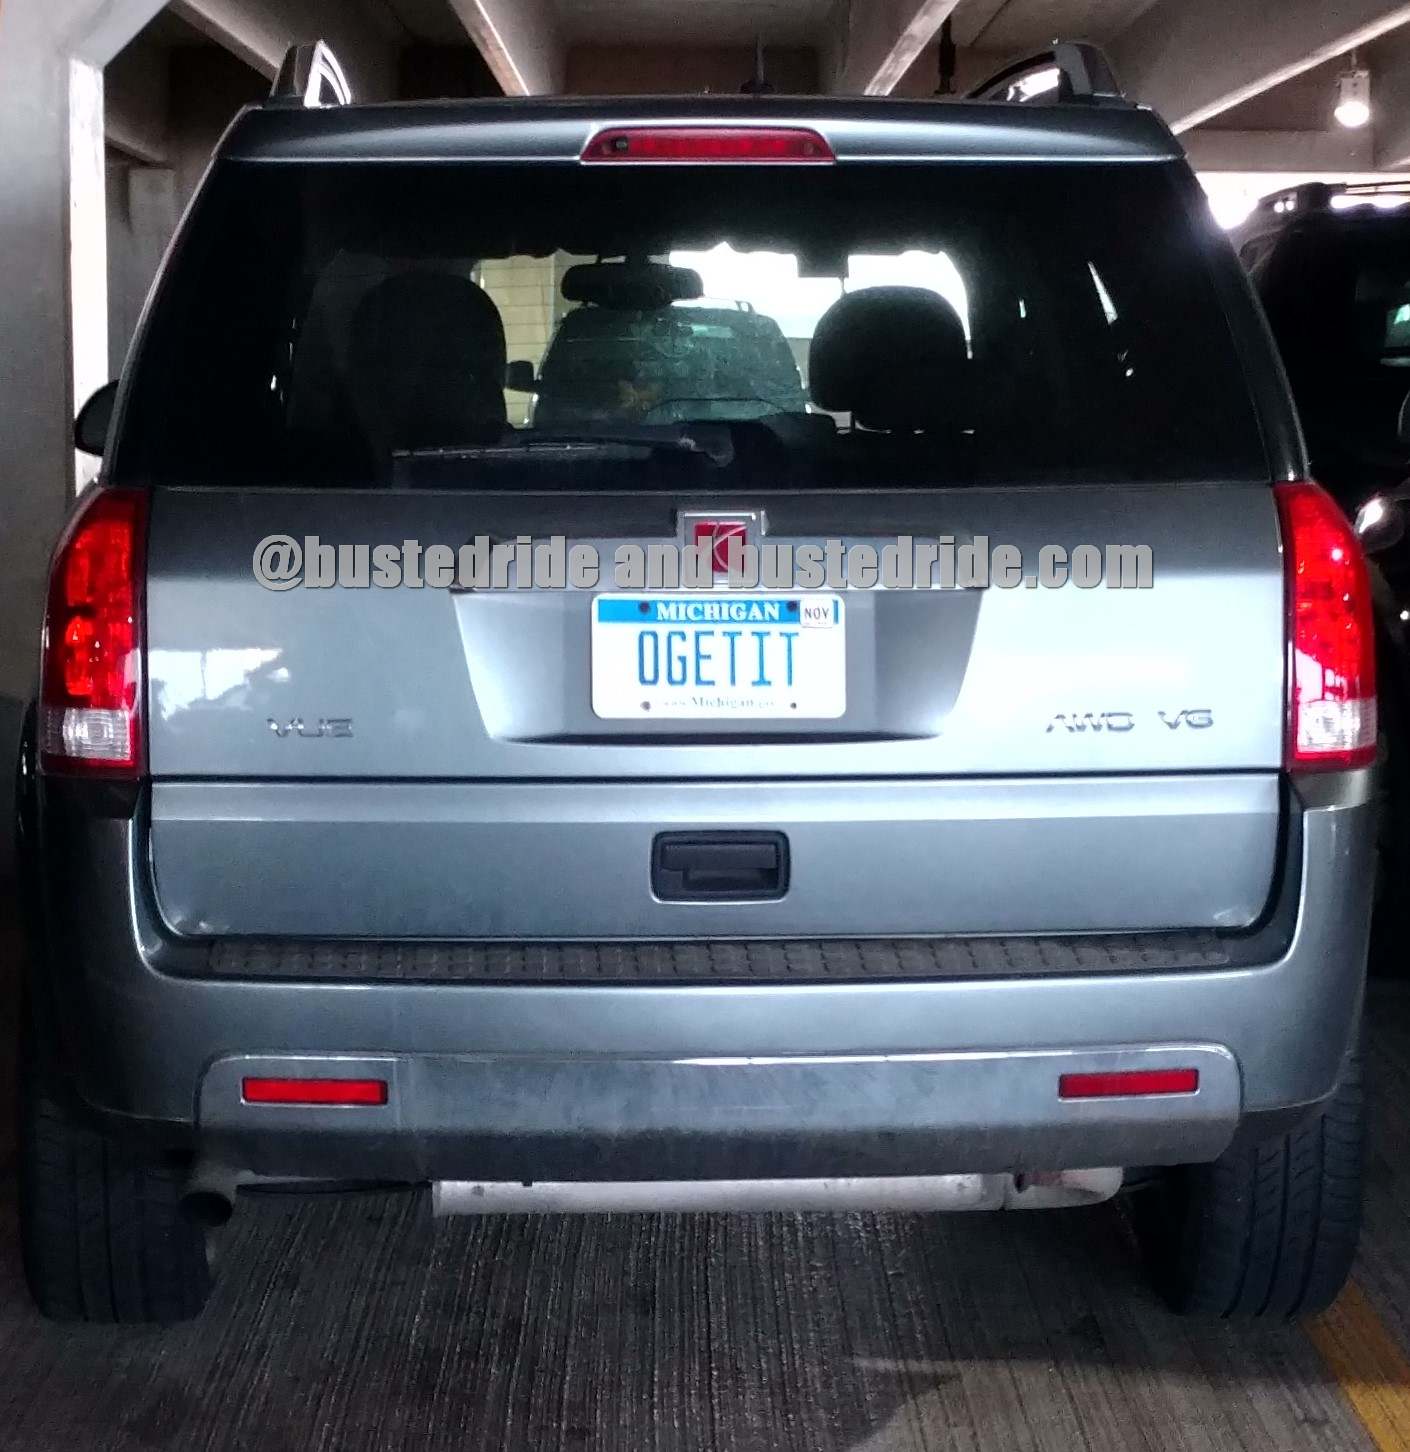 OGETIT - Vanity License Plate by Busted Ride